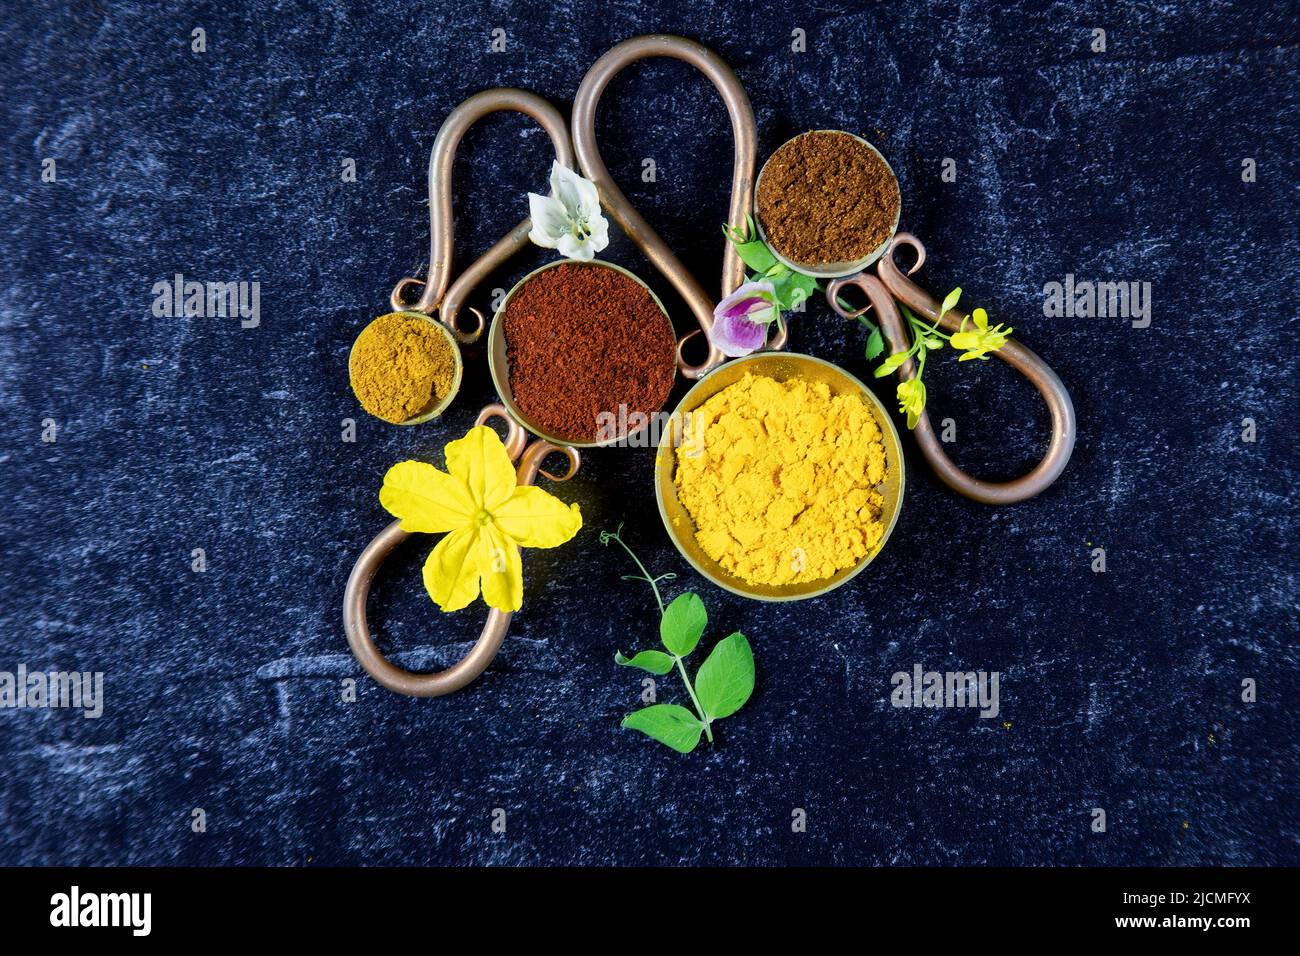 Vintage metal spoons with ground spices of chili powder, tumeric, paprika and curry powder with fresh flowers from flowering vegetables on black with Stock Photo